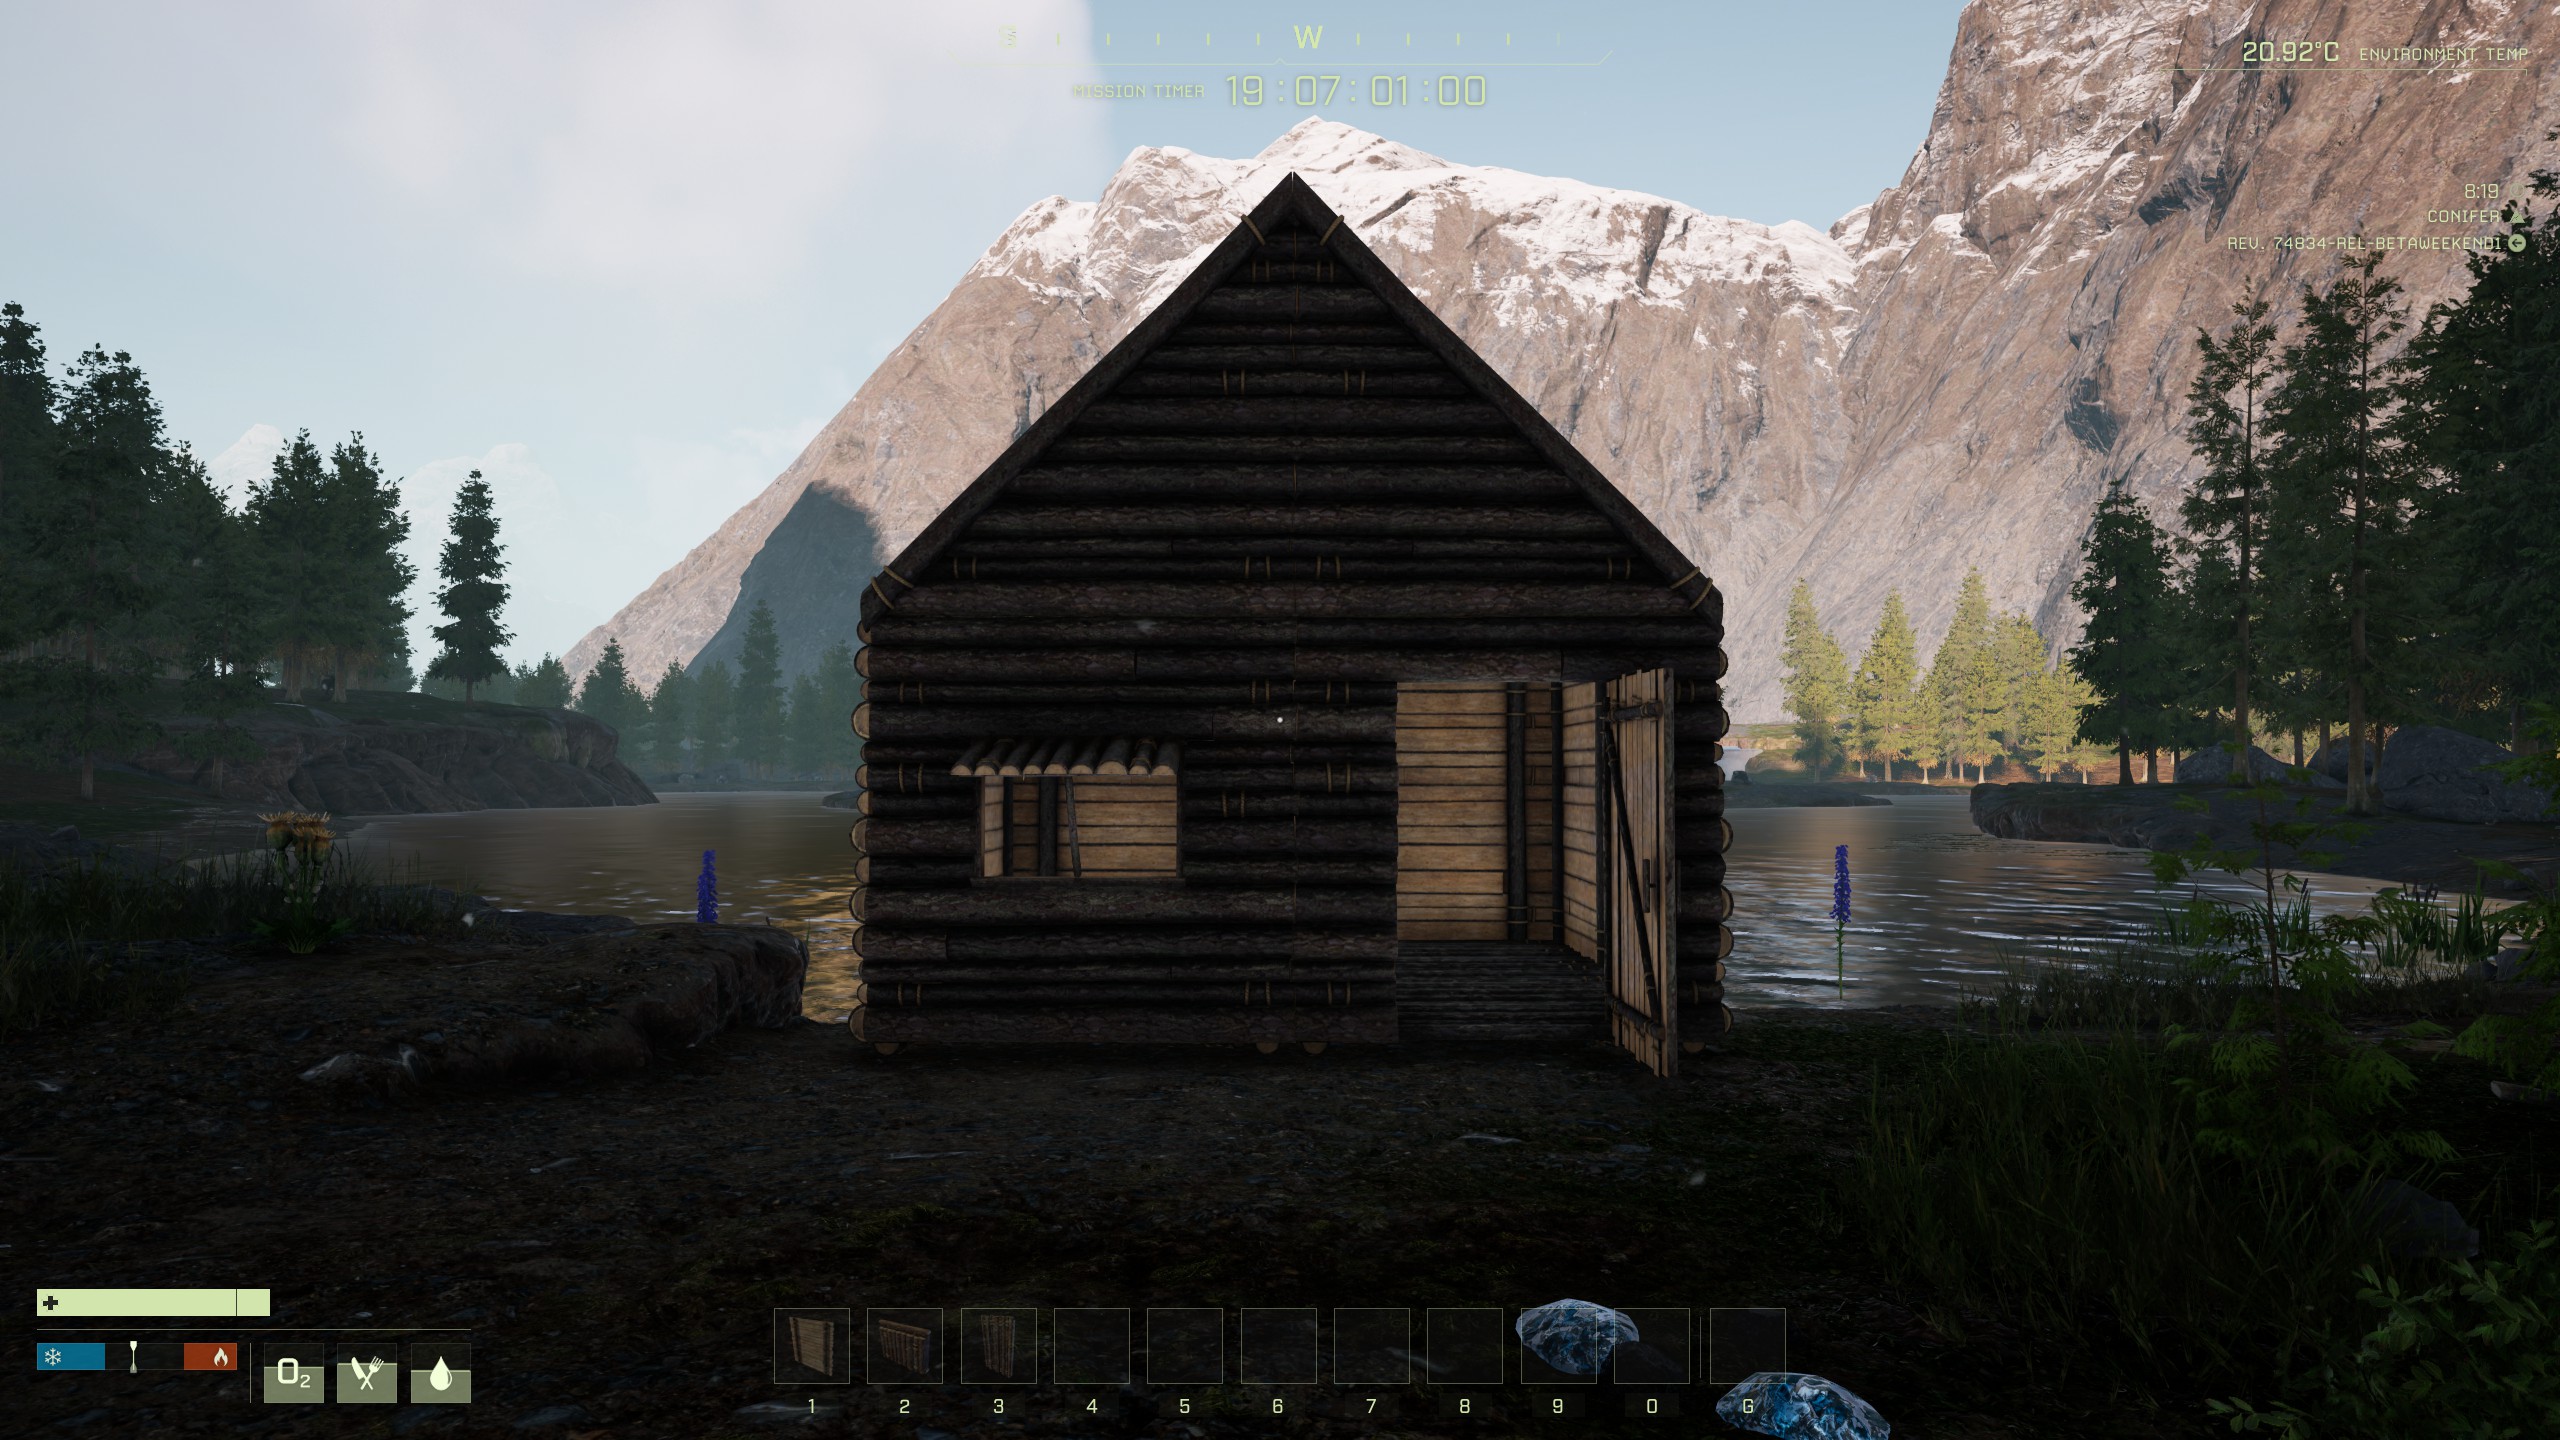 Icarus Beta Basic Guide for Building a House - Step 10: Enjoy your shelter! Now you can stay safe from the Storm! - 474A32E